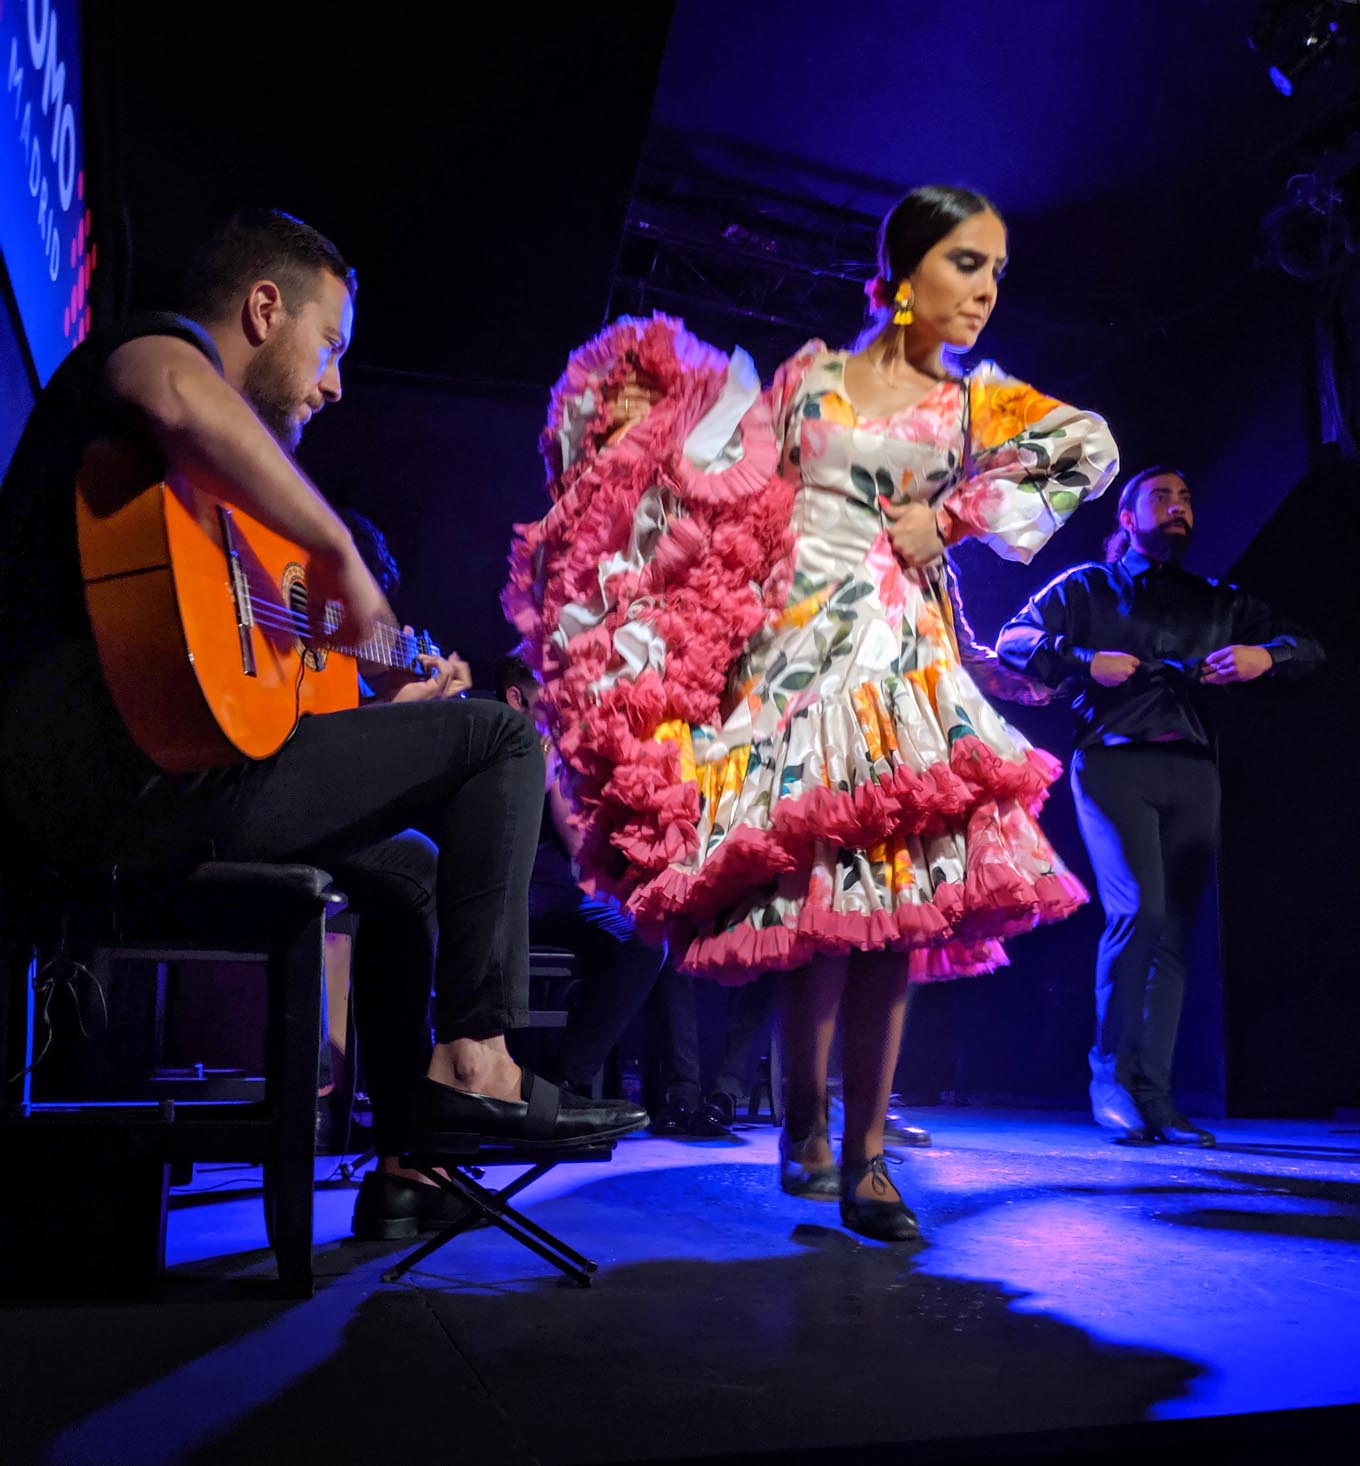 flamenco dancer and guitarist on stage